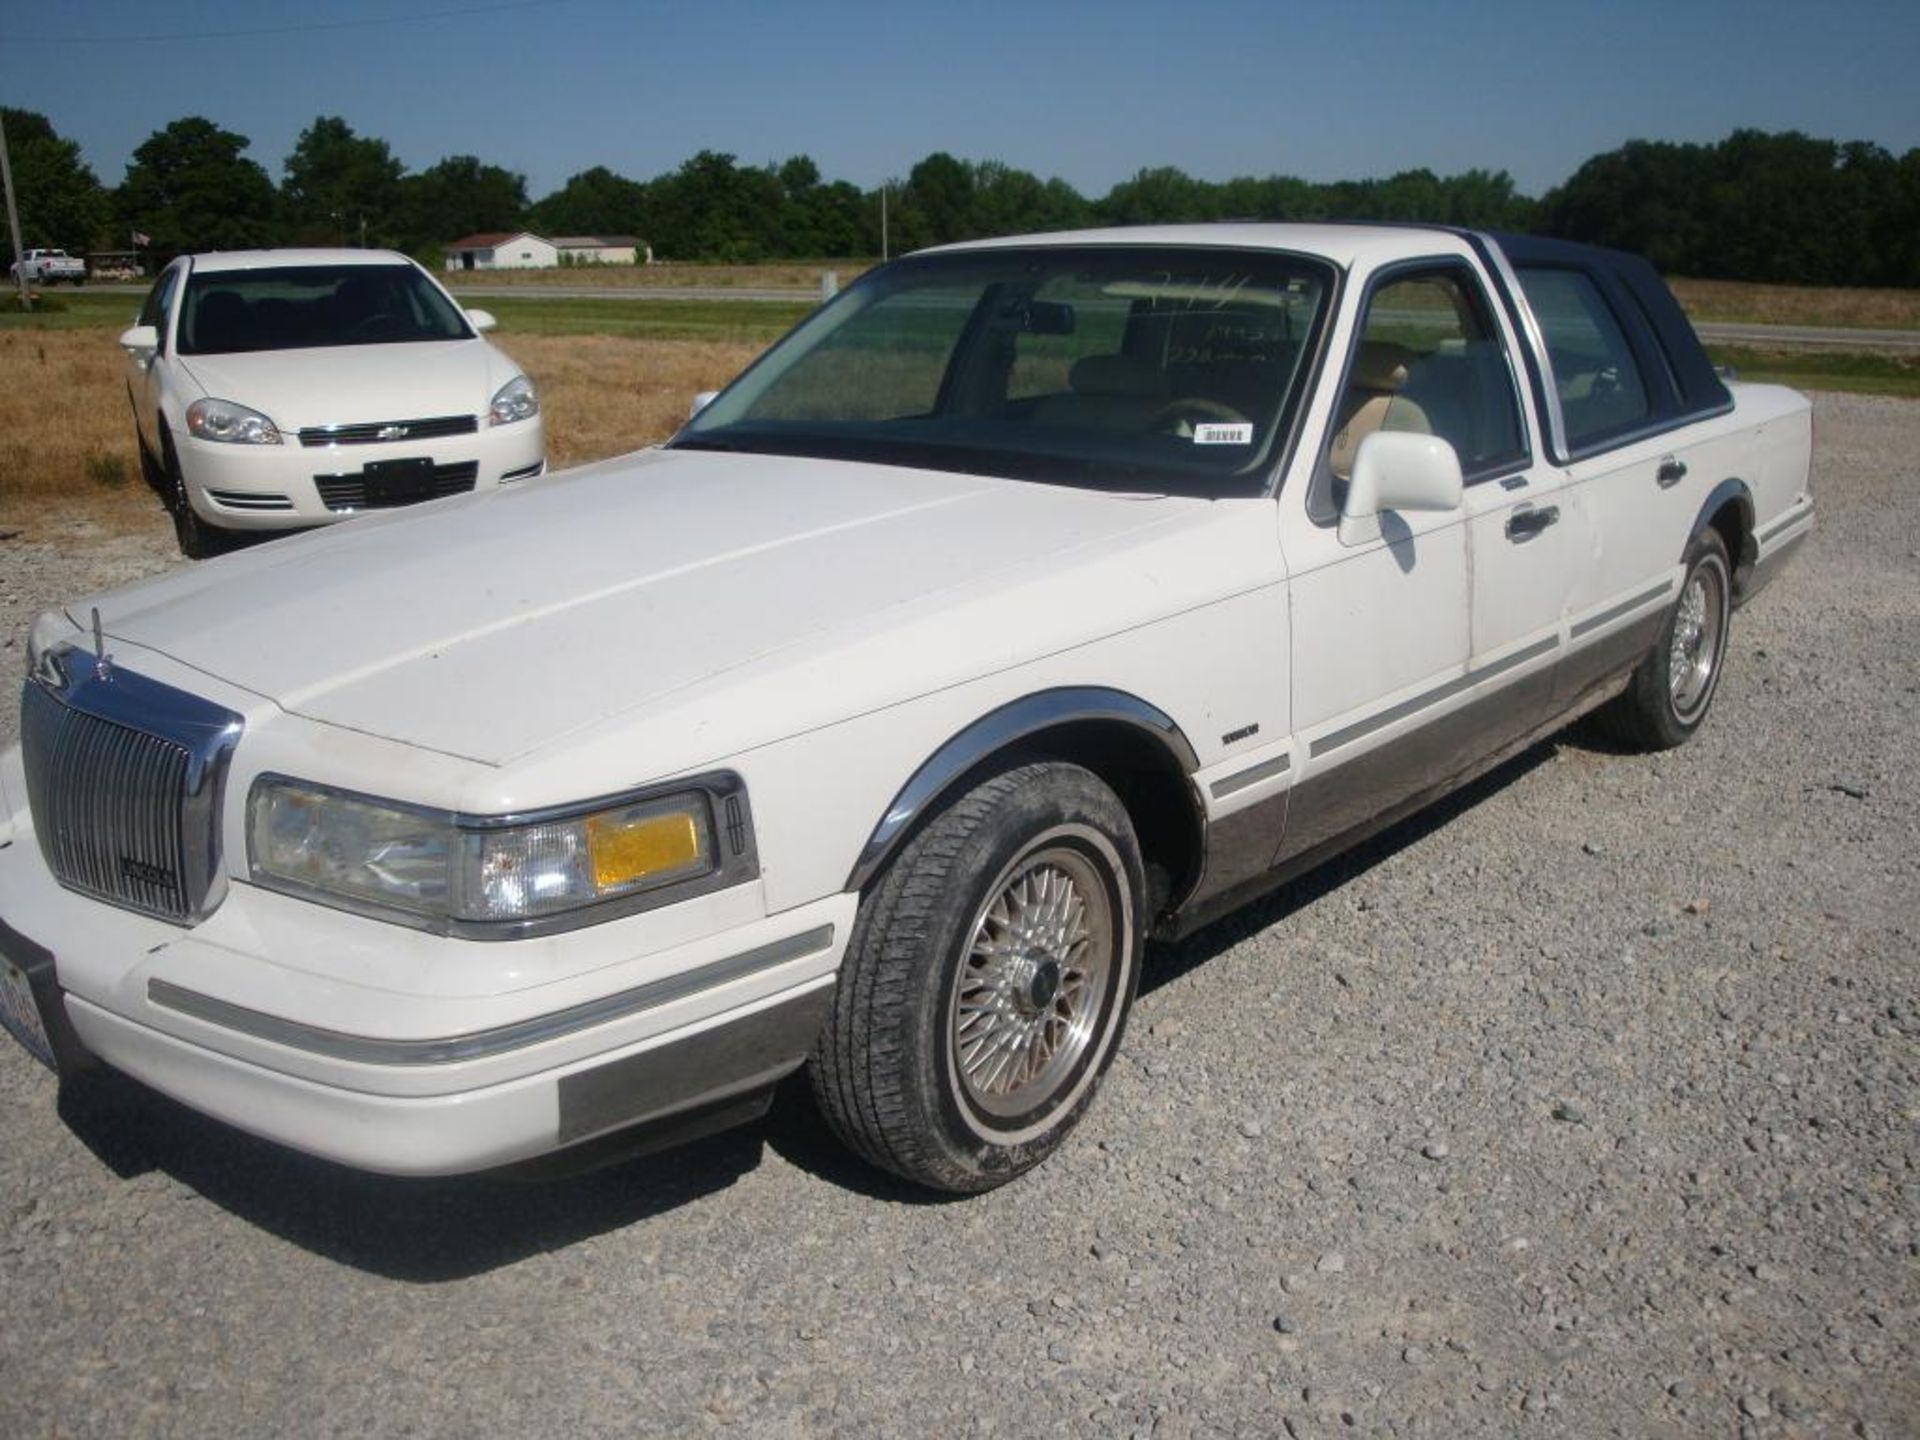 (Title) 1995 Lincoln Towncar,approx. 238,000 miles, Caution-soft brakes, otherwise no issues - Image 2 of 12